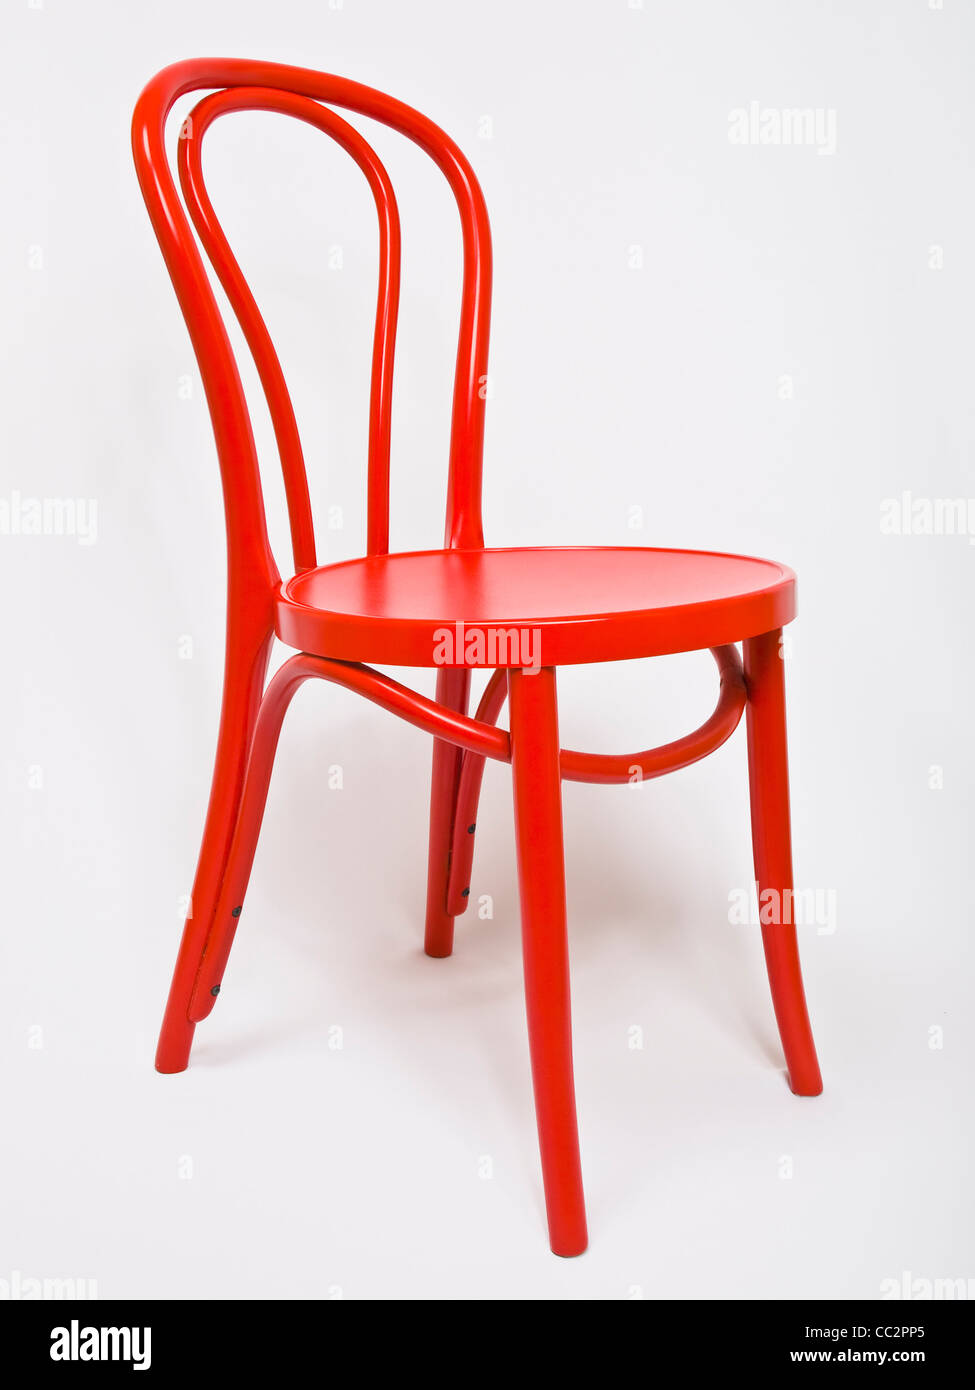 Detail photo of a red chair Stock Photo